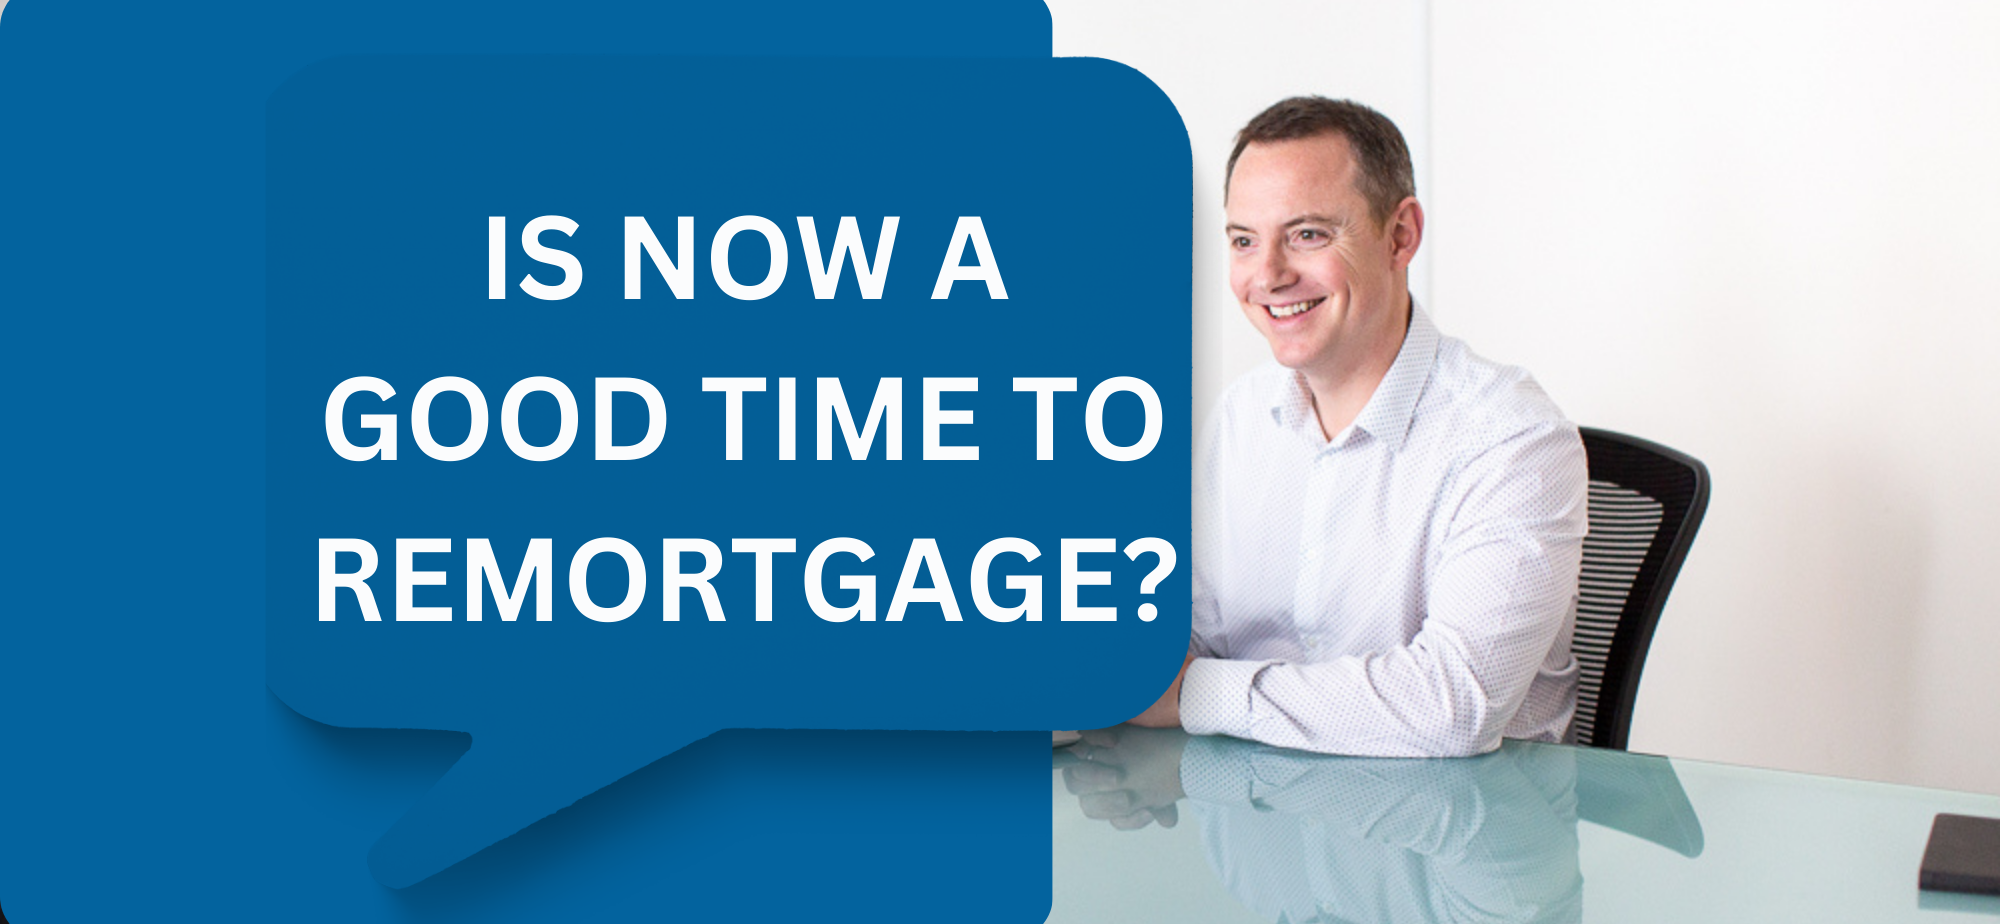 Is now a good time to remortgage?